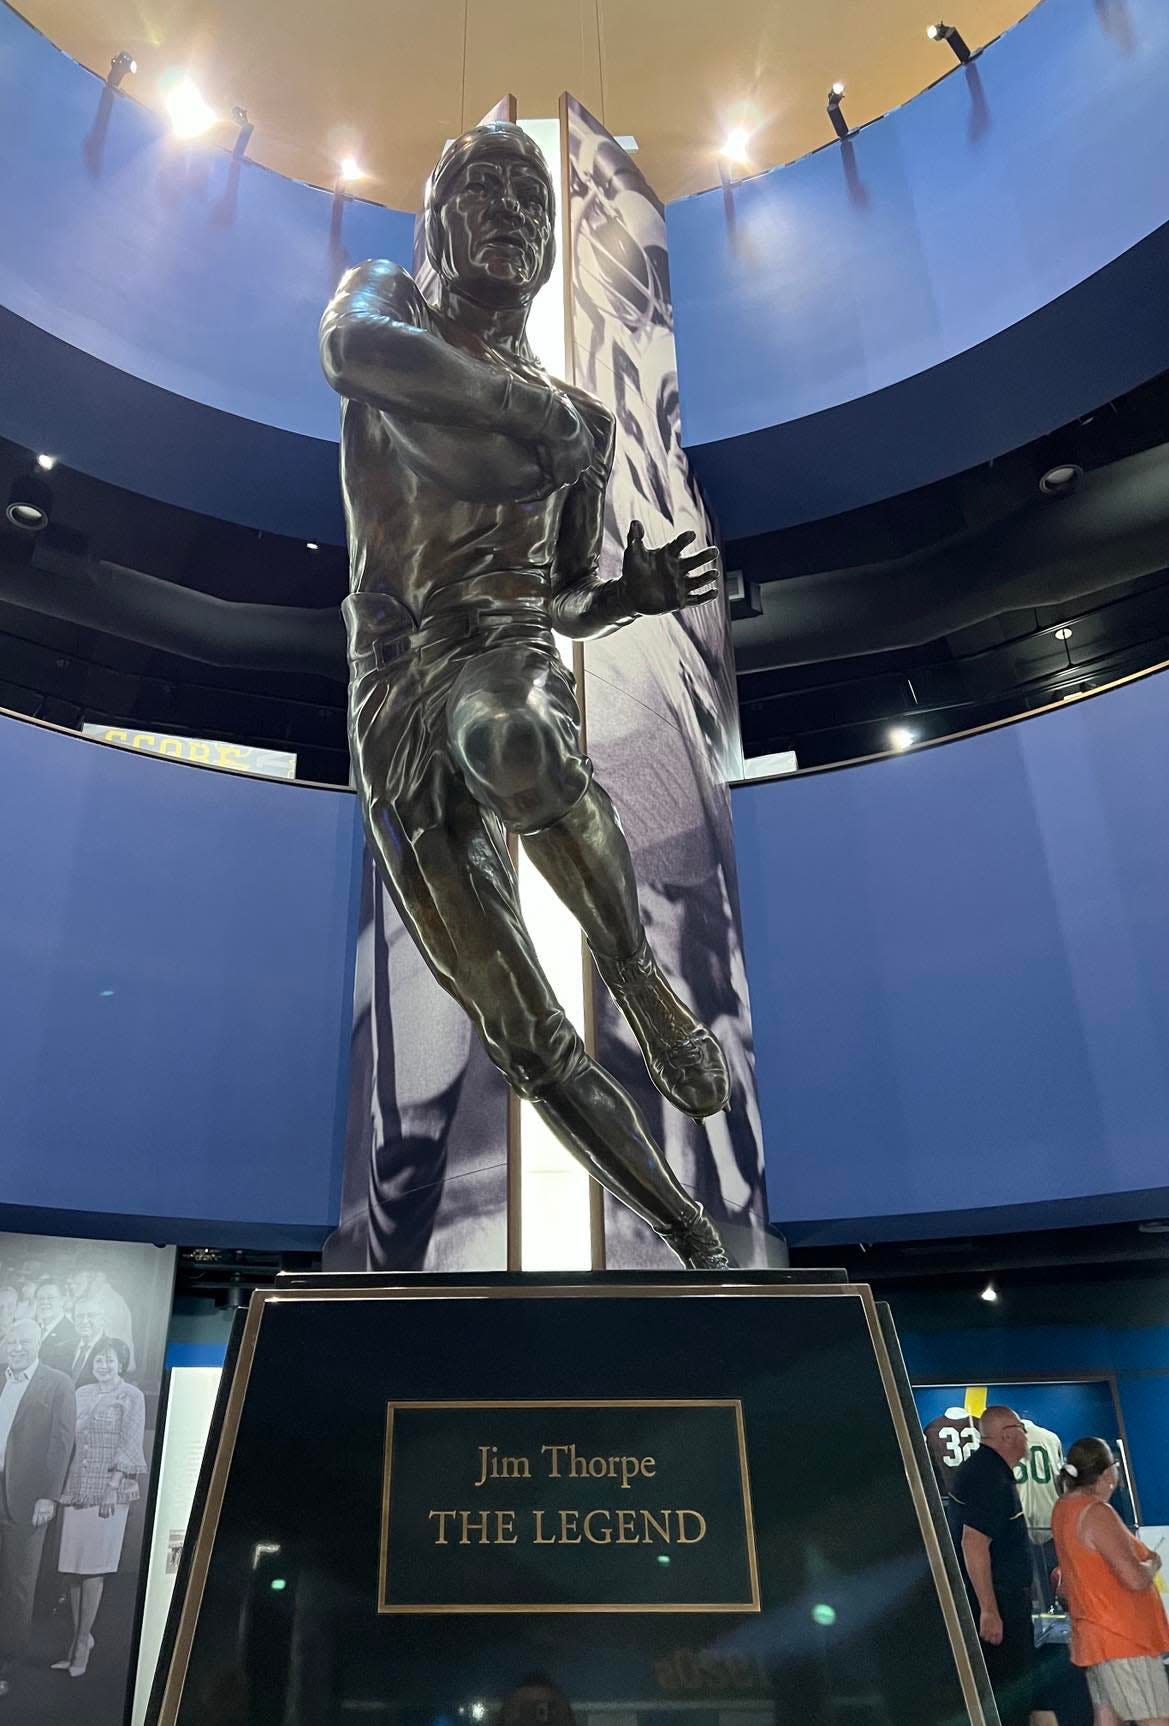 A statue honoring pro football icon Jim Thorpe is on display at the Pro Football Hall of Fame.